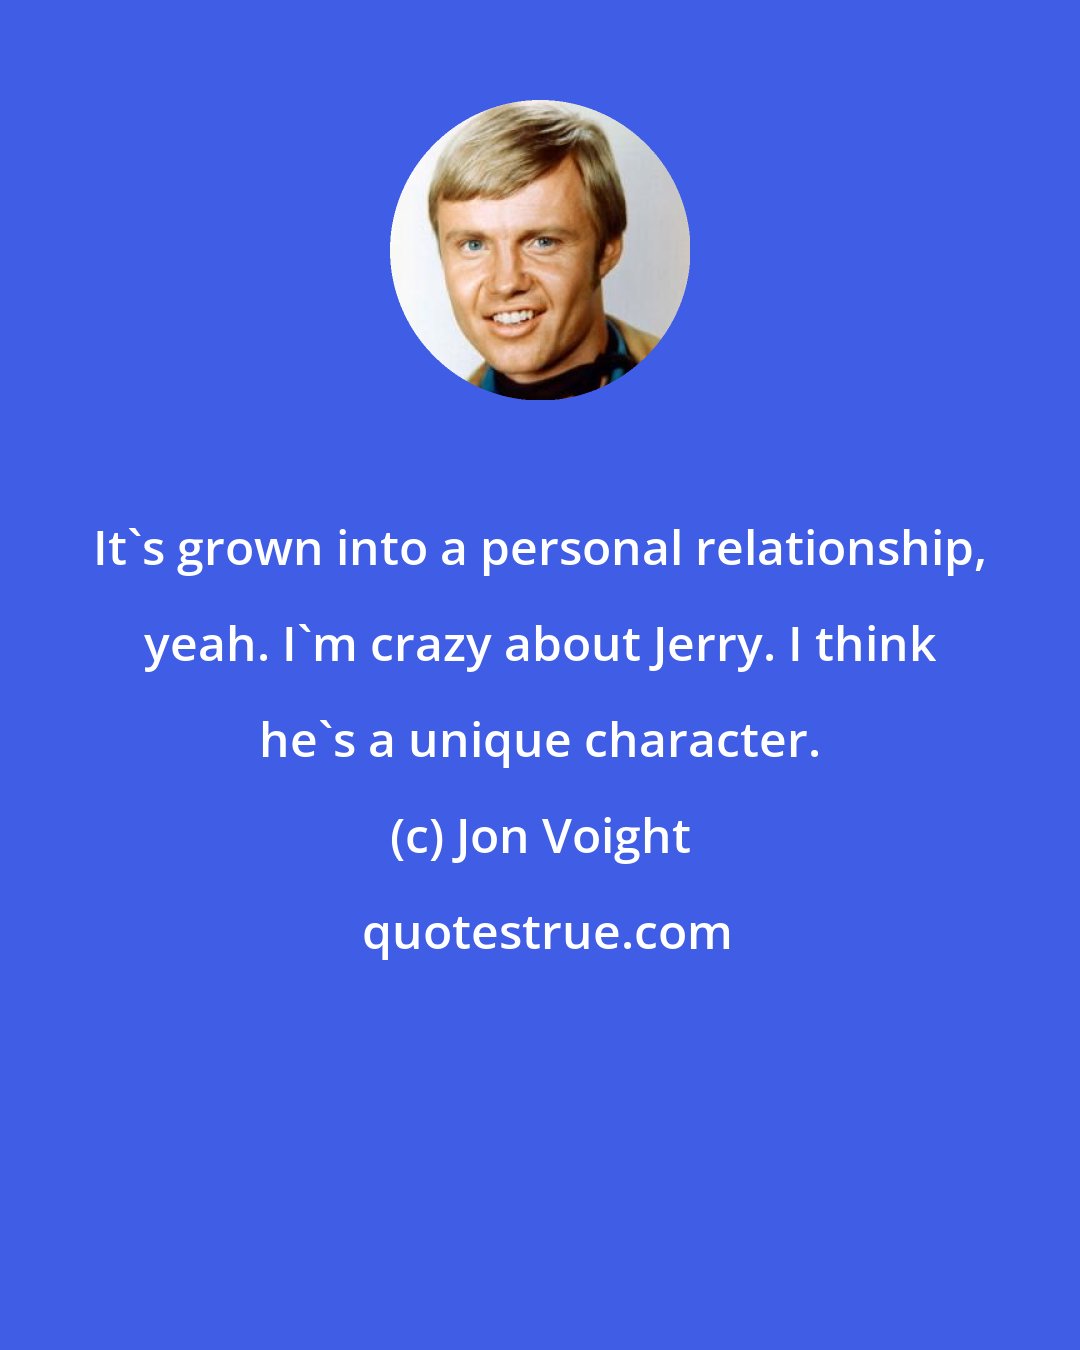 Jon Voight: It's grown into a personal relationship, yeah. I'm crazy about Jerry. I think he's a unique character.